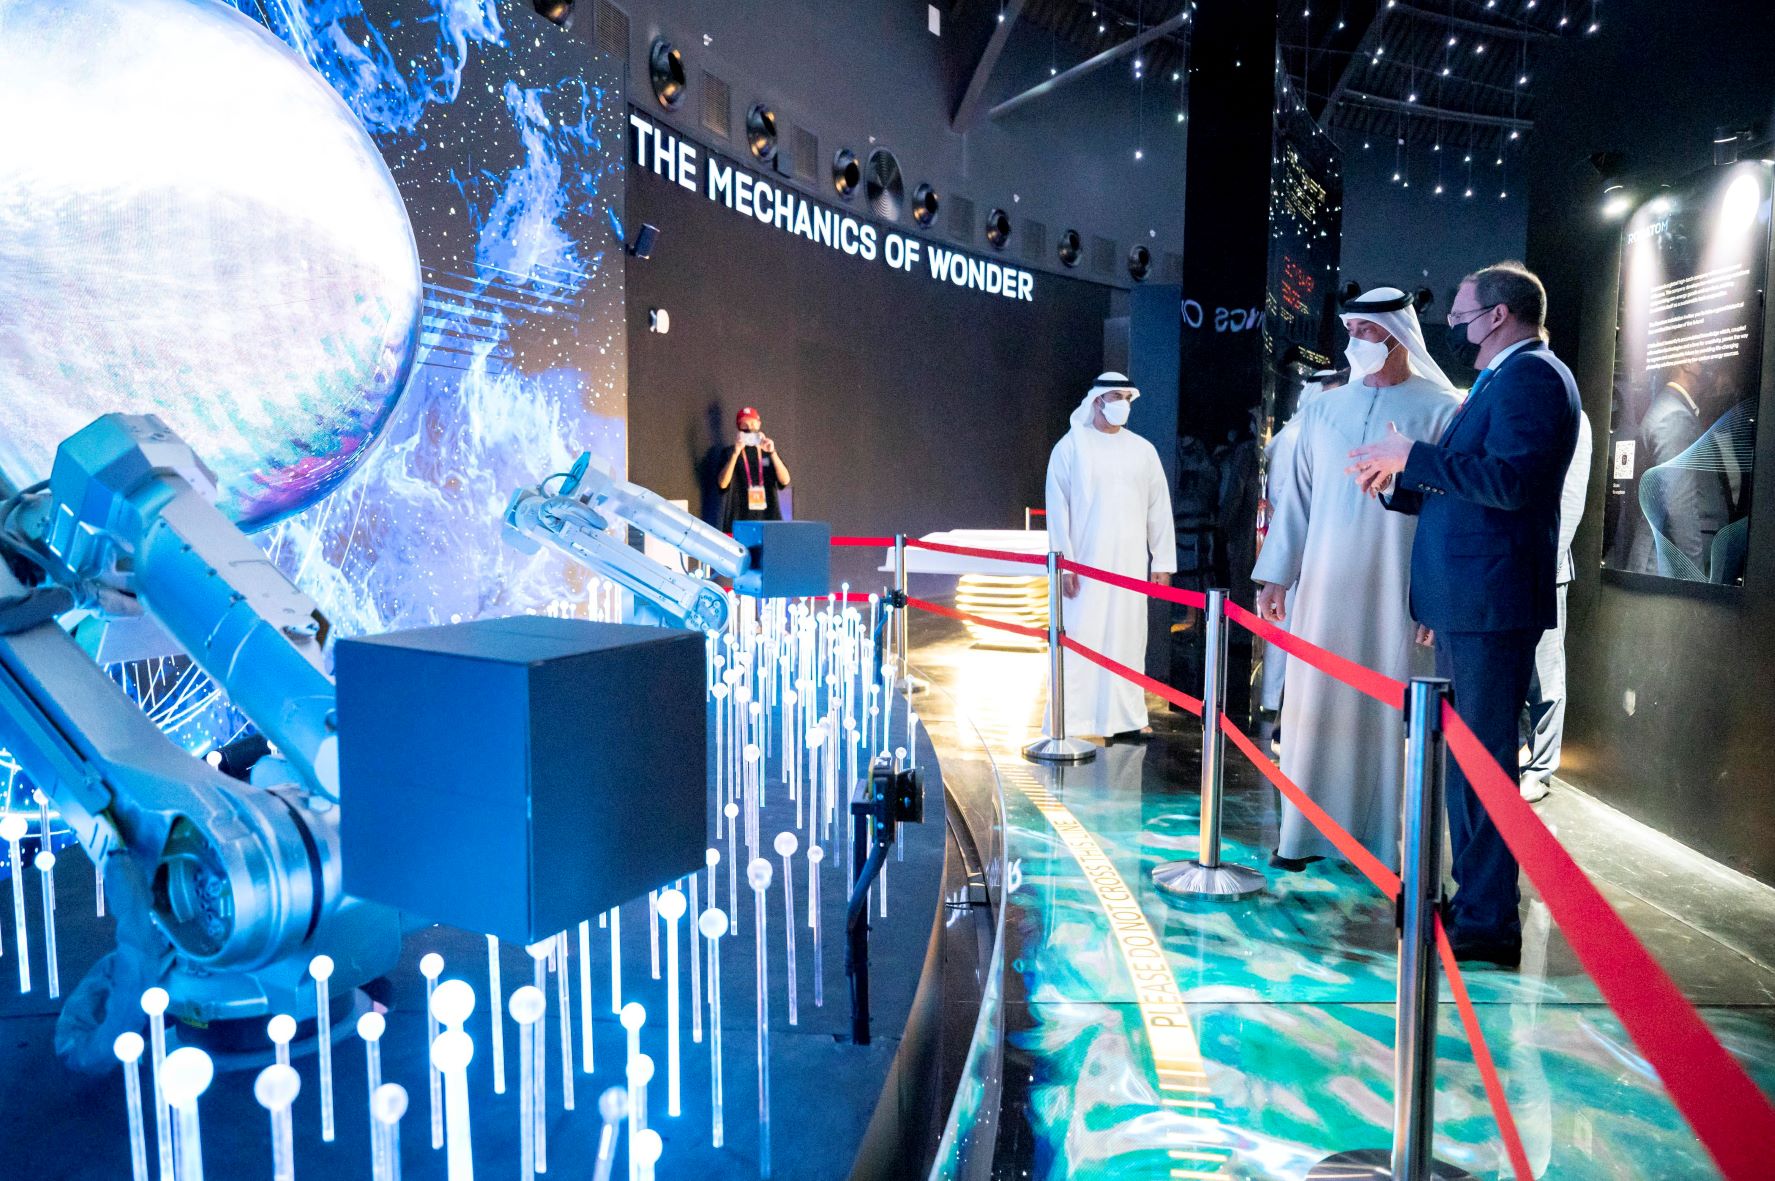 HH Sheikh Mohamed bin Zayed Al Nahyan_ Crown Prince of Abu Dhabi and Deputy Supreme Commander of the UAE Armed Forces visits Expo 2020_Large Image_m5465 (1)